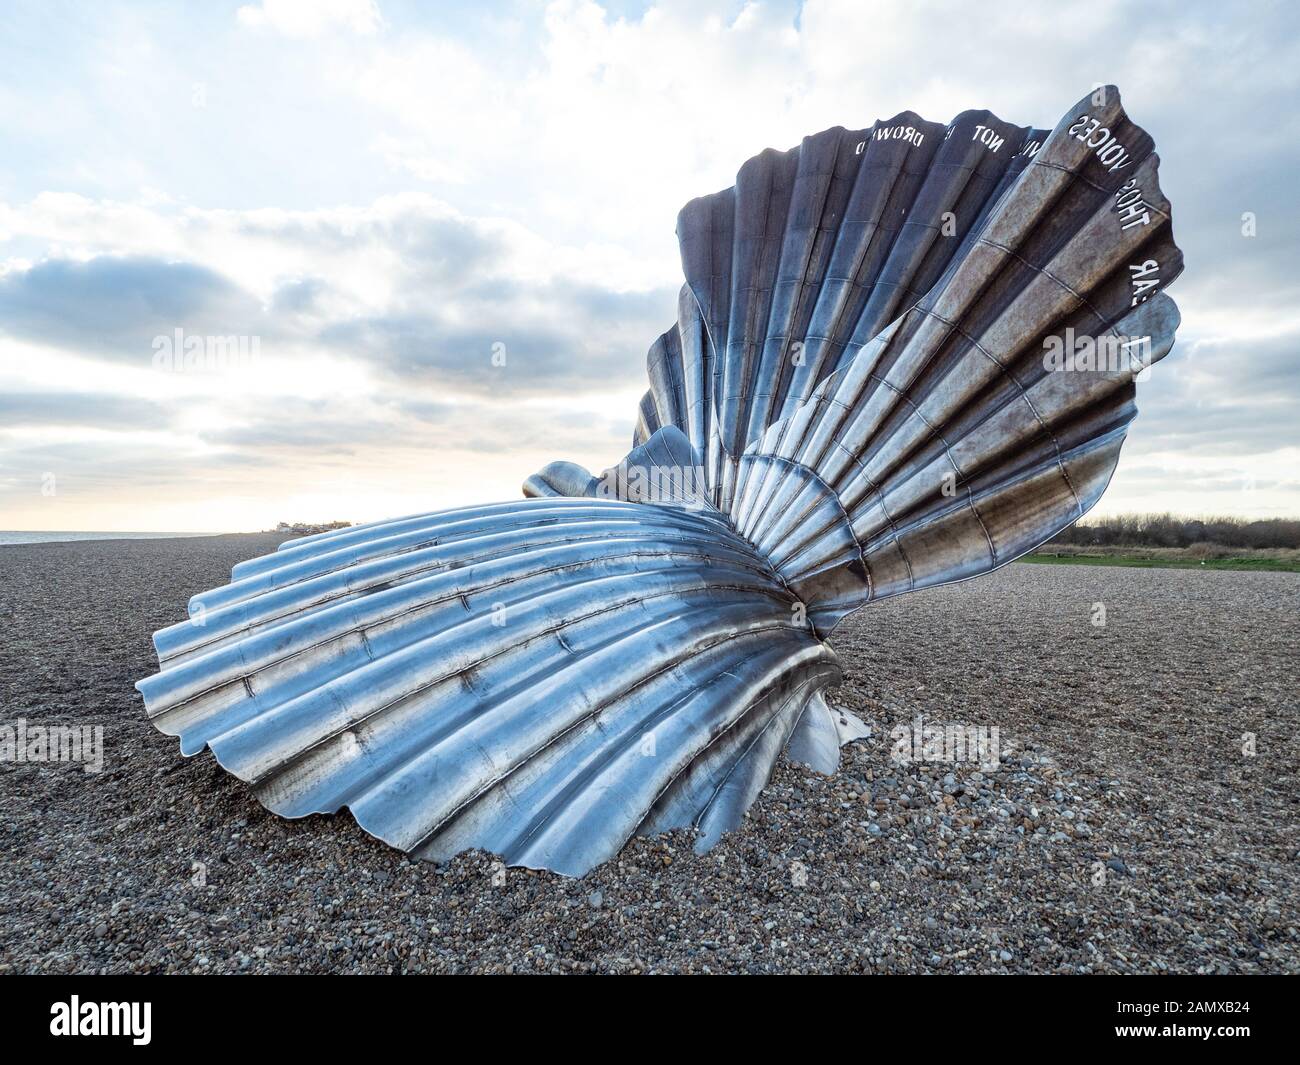 A side view of the shell sculpture on Aldeburgh beach just after cleaning against a shingle background Stock Photo